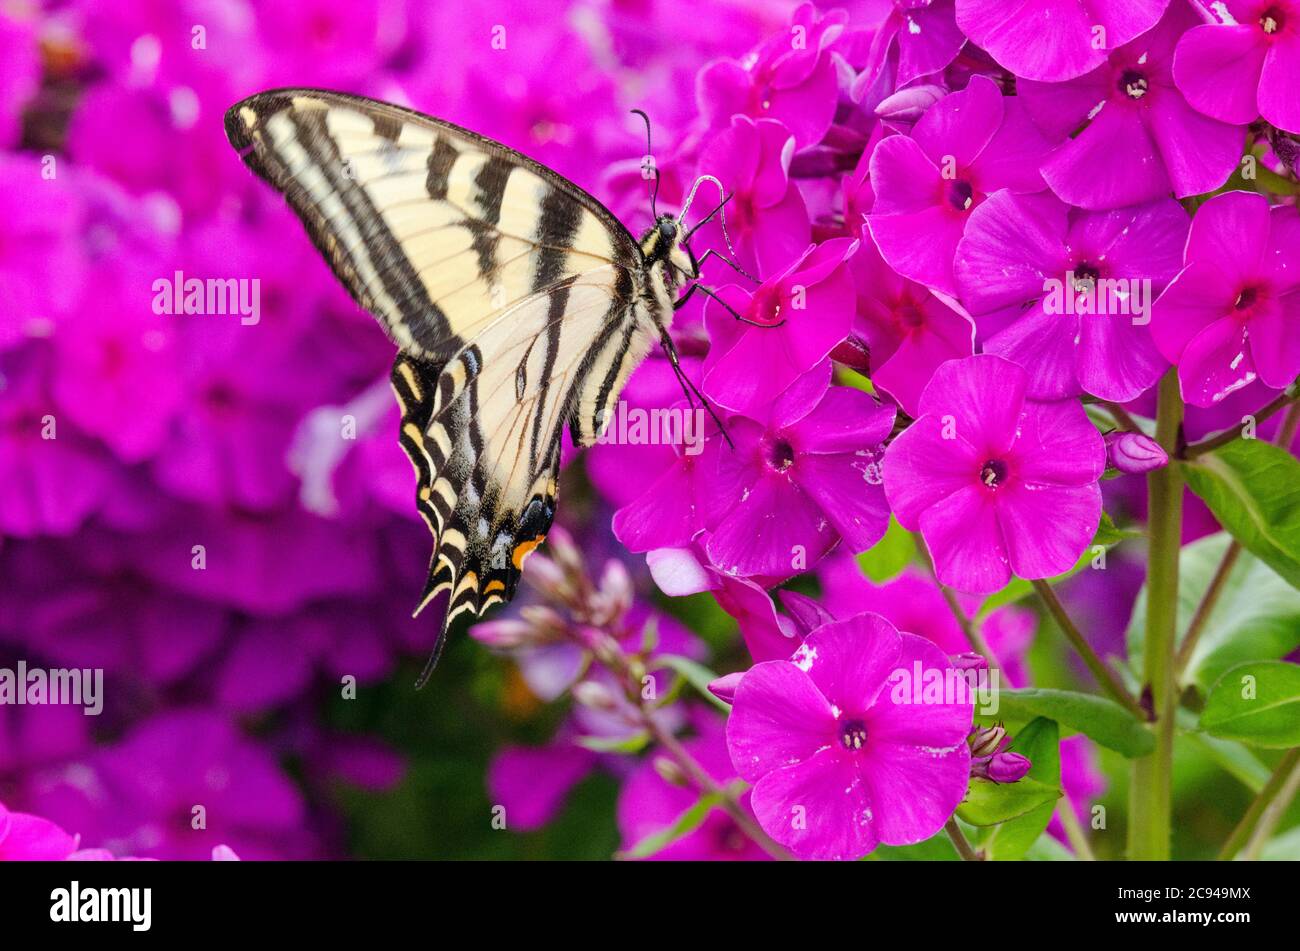 A Western Tiger Swallowtail butterfly looks for nectar among the flowers of a phlox plant in a community garden in Redmond, Washington. Stock Photo